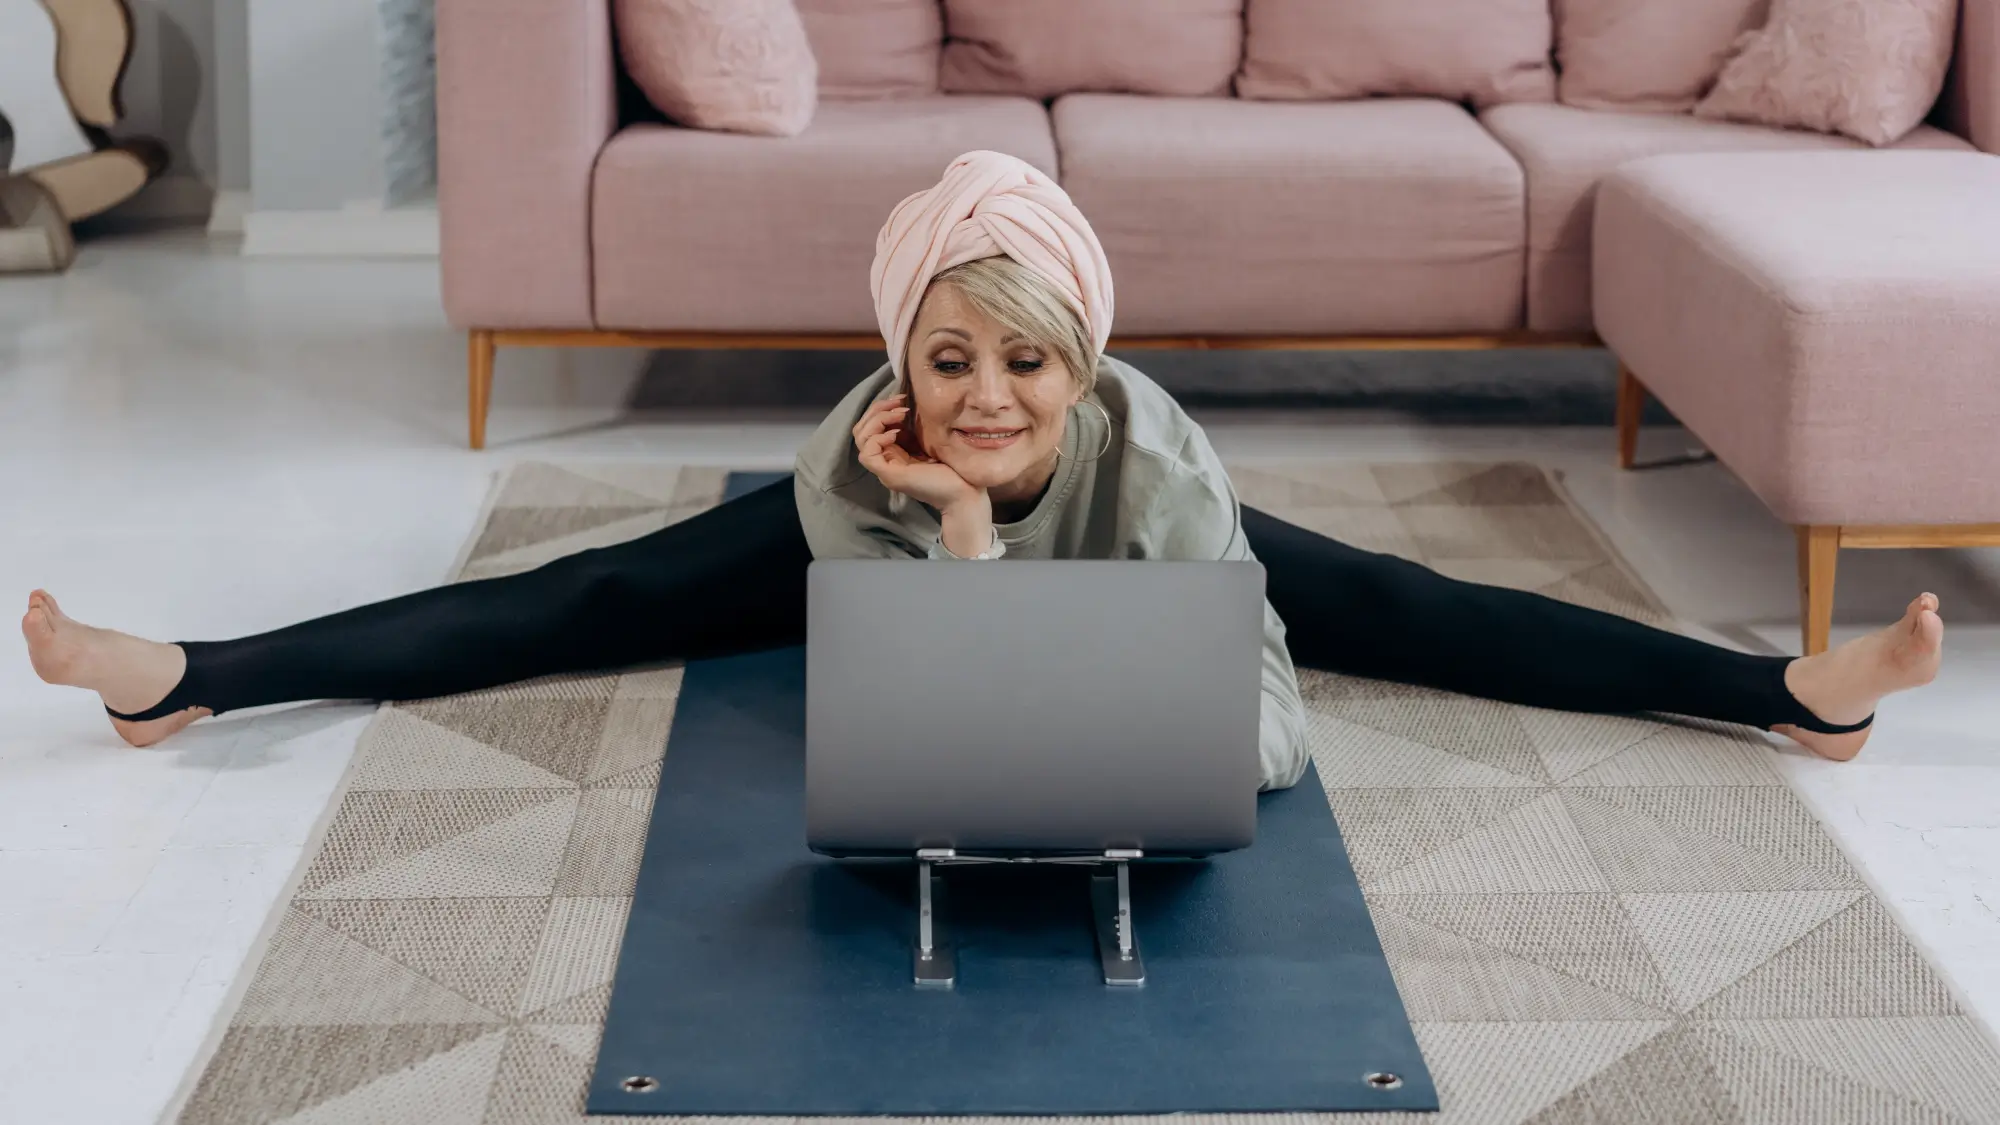 Old woman stretching on yoga mat in her living room while working on her laptop